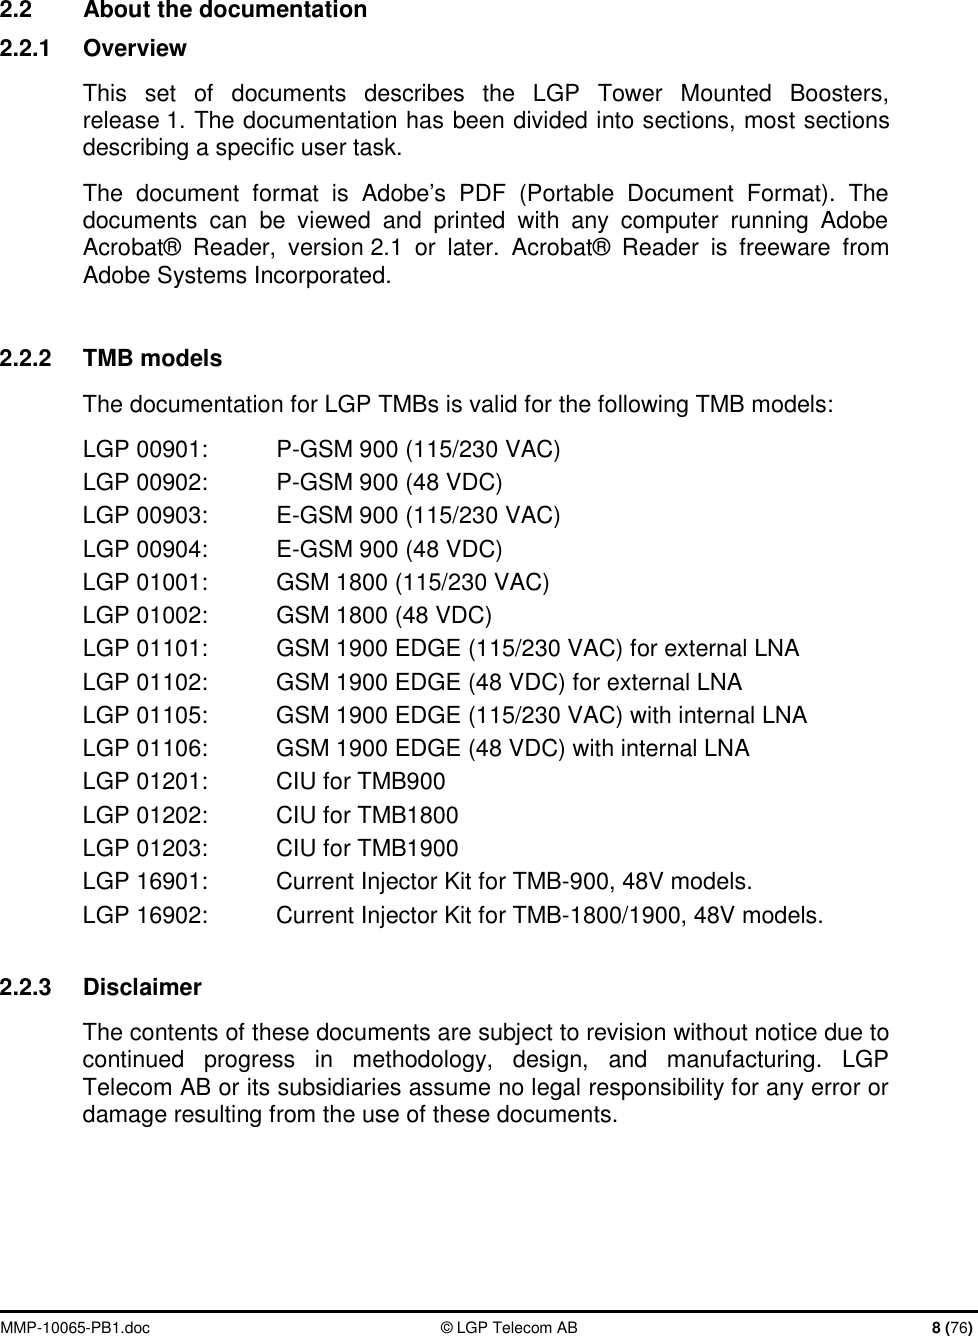  MMP-10065-PB1.doc  © LGP Telecom AB  8 (76)   2.2  About the documentation 2.2.1  Overview This set of documents describes the LGP Tower Mounted Boosters, release 1. The documentation has been divided into sections, most sections describing a specific user task. The document format is Adobe’s PDF (Portable Document Format). The documents can be viewed and printed with any computer running Adobe Acrobat® Reader, version 2.1 or later. Acrobat® Reader is freeware from Adobe Systems Incorporated.   2.2.2  TMB models The documentation for LGP TMBs is valid for the following TMB models: LGP 00901:  P-GSM 900 (115/230 VAC) LGP 00902:  P-GSM 900 (48 VDC) LGP 00903:  E-GSM 900 (115/230 VAC) LGP 00904:  E-GSM 900 (48 VDC) LGP 01001:  GSM 1800 (115/230 VAC) LGP 01002:  GSM 1800 (48 VDC) LGP 01101:  GSM 1900 EDGE (115/230 VAC) for external LNA LGP 01102:  GSM 1900 EDGE (48 VDC) for external LNA LGP 01105:  GSM 1900 EDGE (115/230 VAC) with internal LNA LGP 01106:  GSM 1900 EDGE (48 VDC) with internal LNA LGP 01201:  CIU for TMB900 LGP 01202:    CIU for TMB1800 LGP 01203:  CIU for TMB1900 LGP 16901:  Current Injector Kit for TMB-900, 48V models. LGP 16902:  Current Injector Kit for TMB-1800/1900, 48V models.  2.2.3  Disclaimer The contents of these documents are subject to revision without notice due to continued progress in methodology, design, and manufacturing. LGP Telecom AB or its subsidiaries assume no legal responsibility for any error or damage resulting from the use of these documents. 